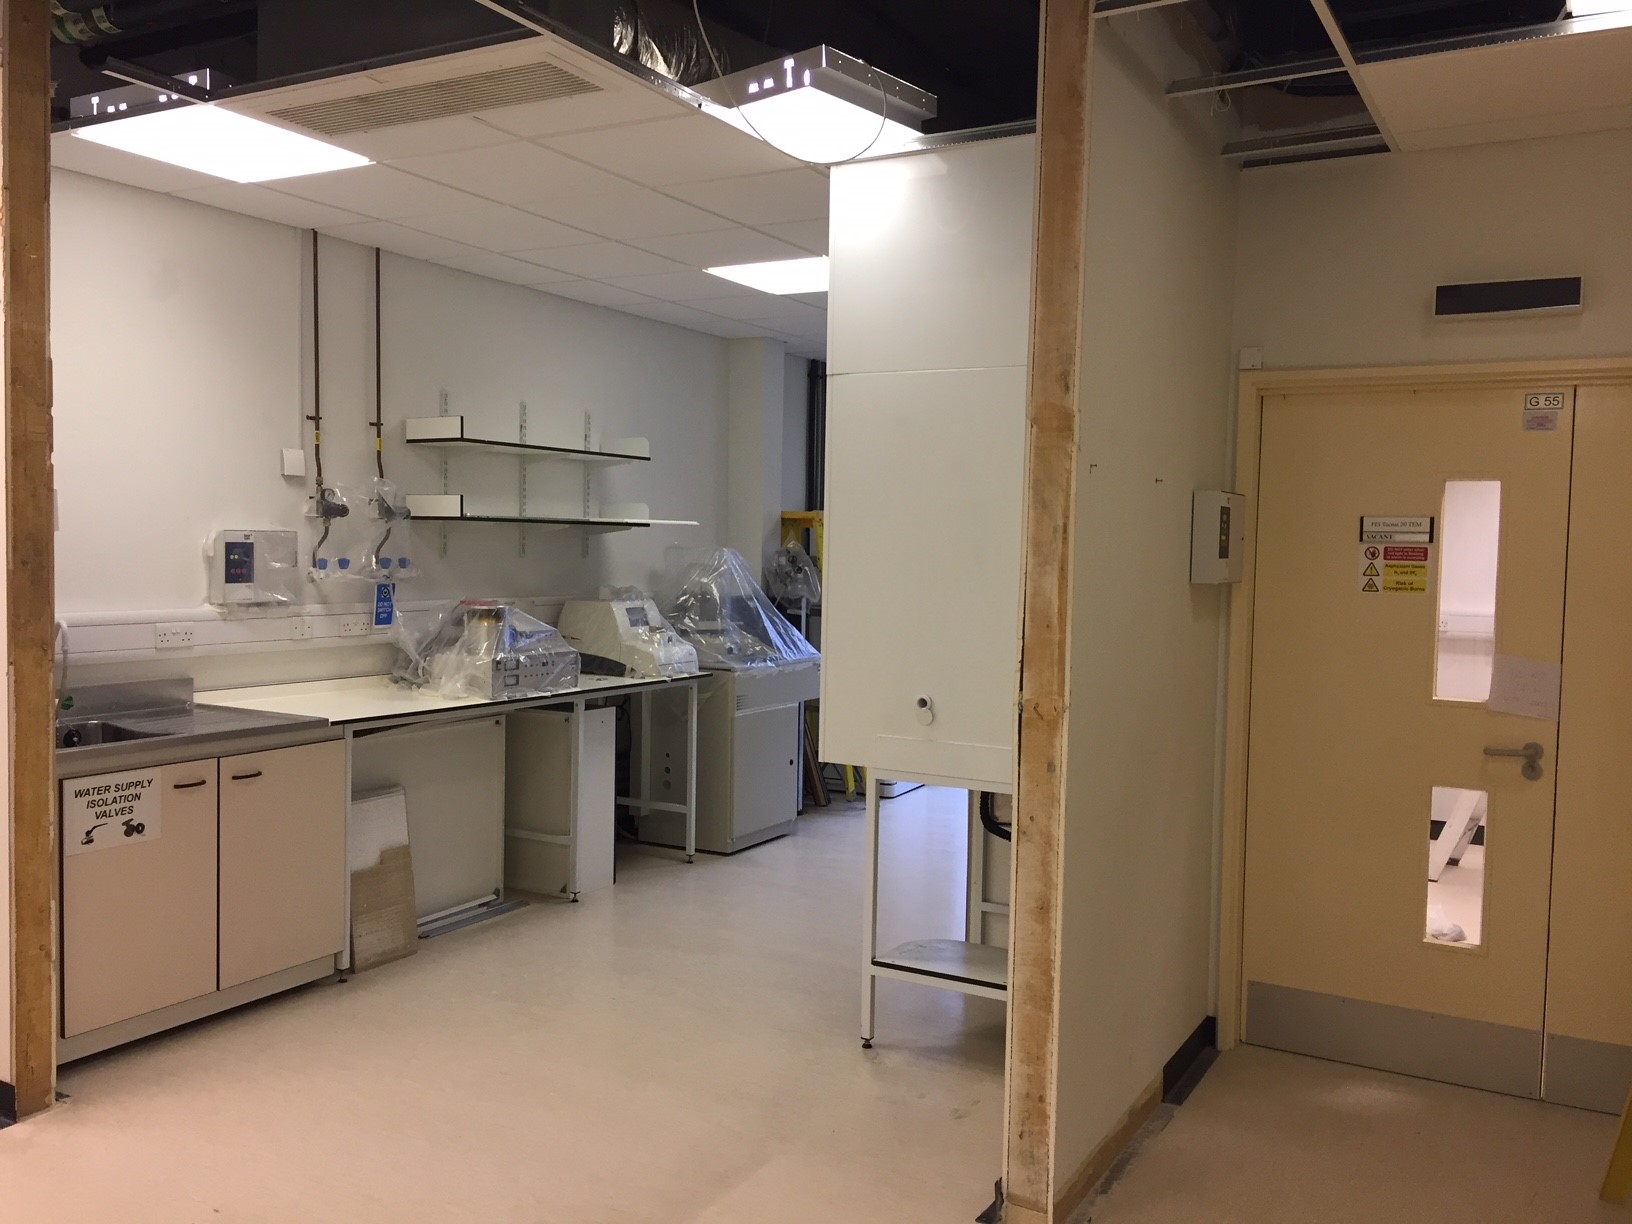 The lab, minus the corner wall, ready for delivery of the Cryo-EM